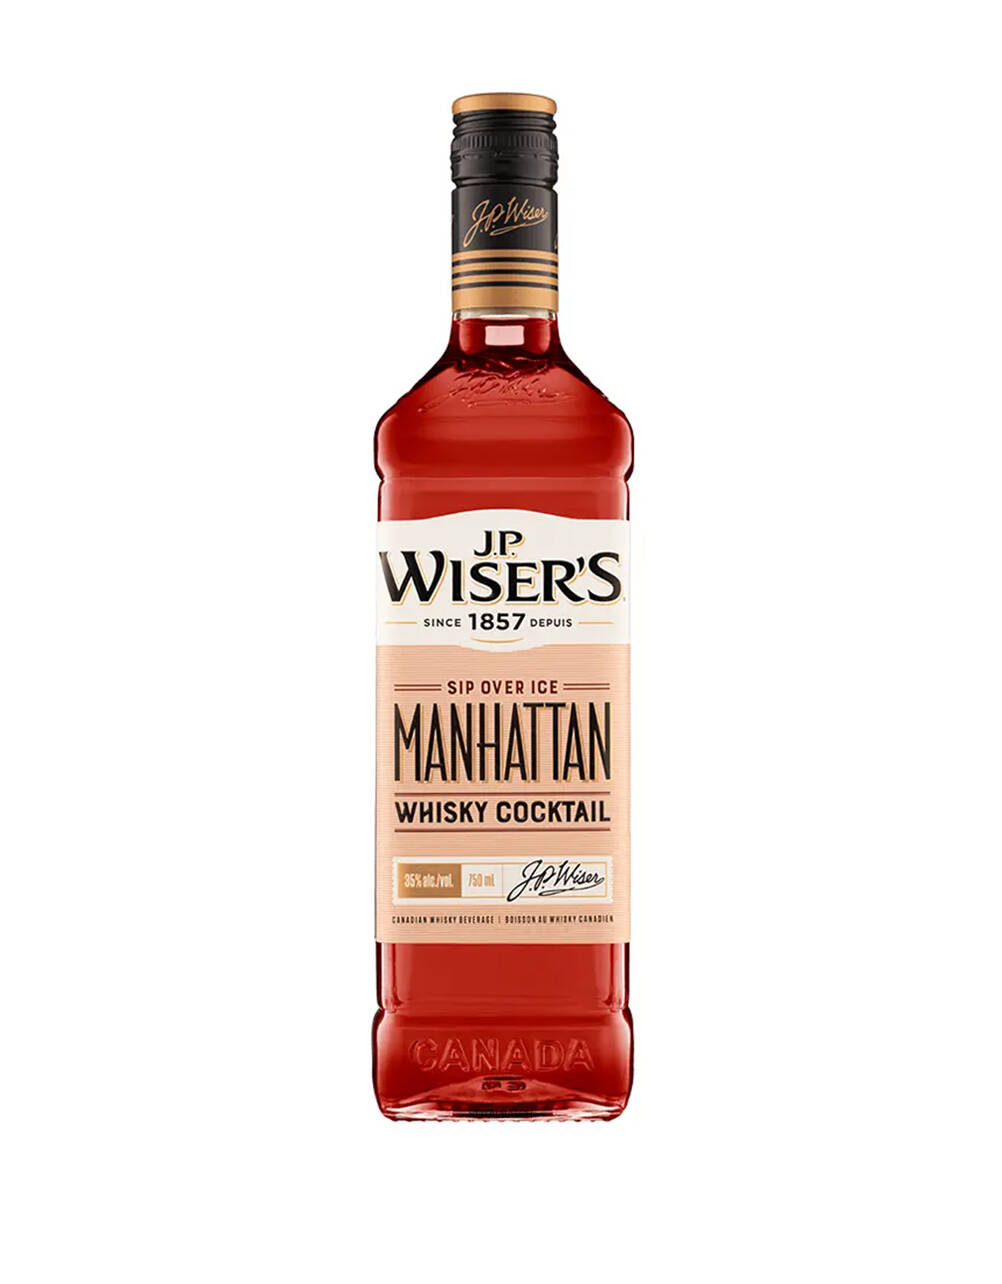 JP Wisers Manhattan Canadian Whisky Cocktail